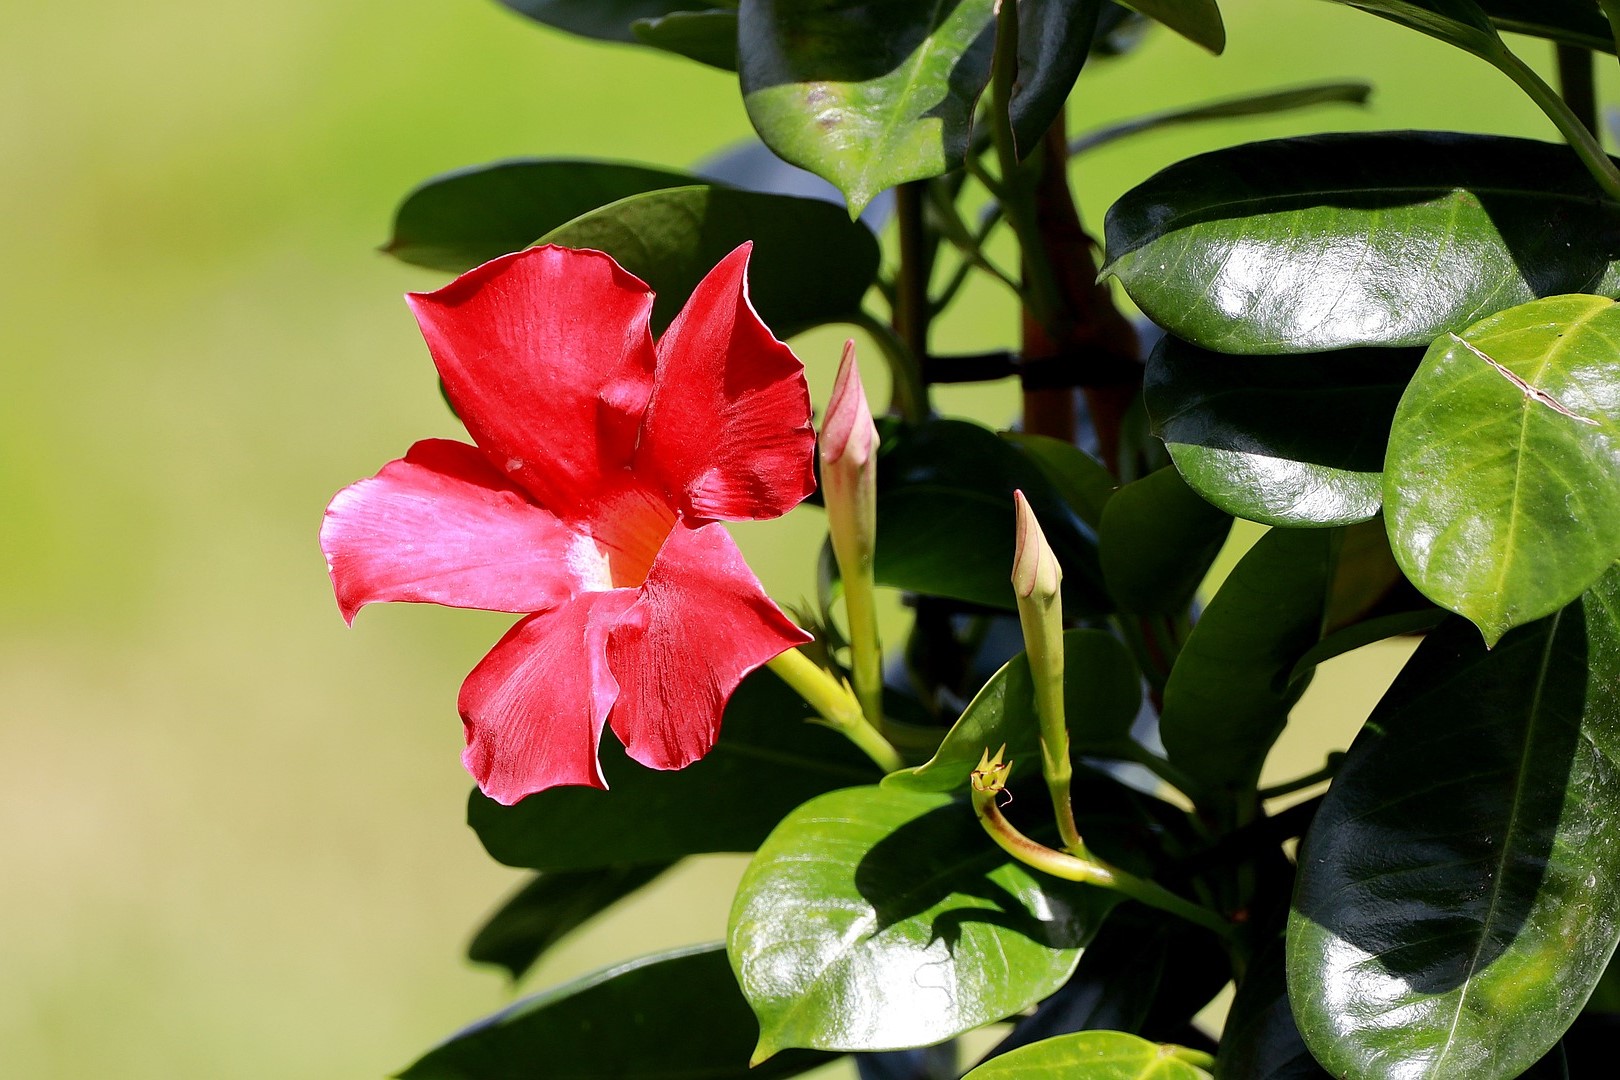 A mandevilla plant with one red flower